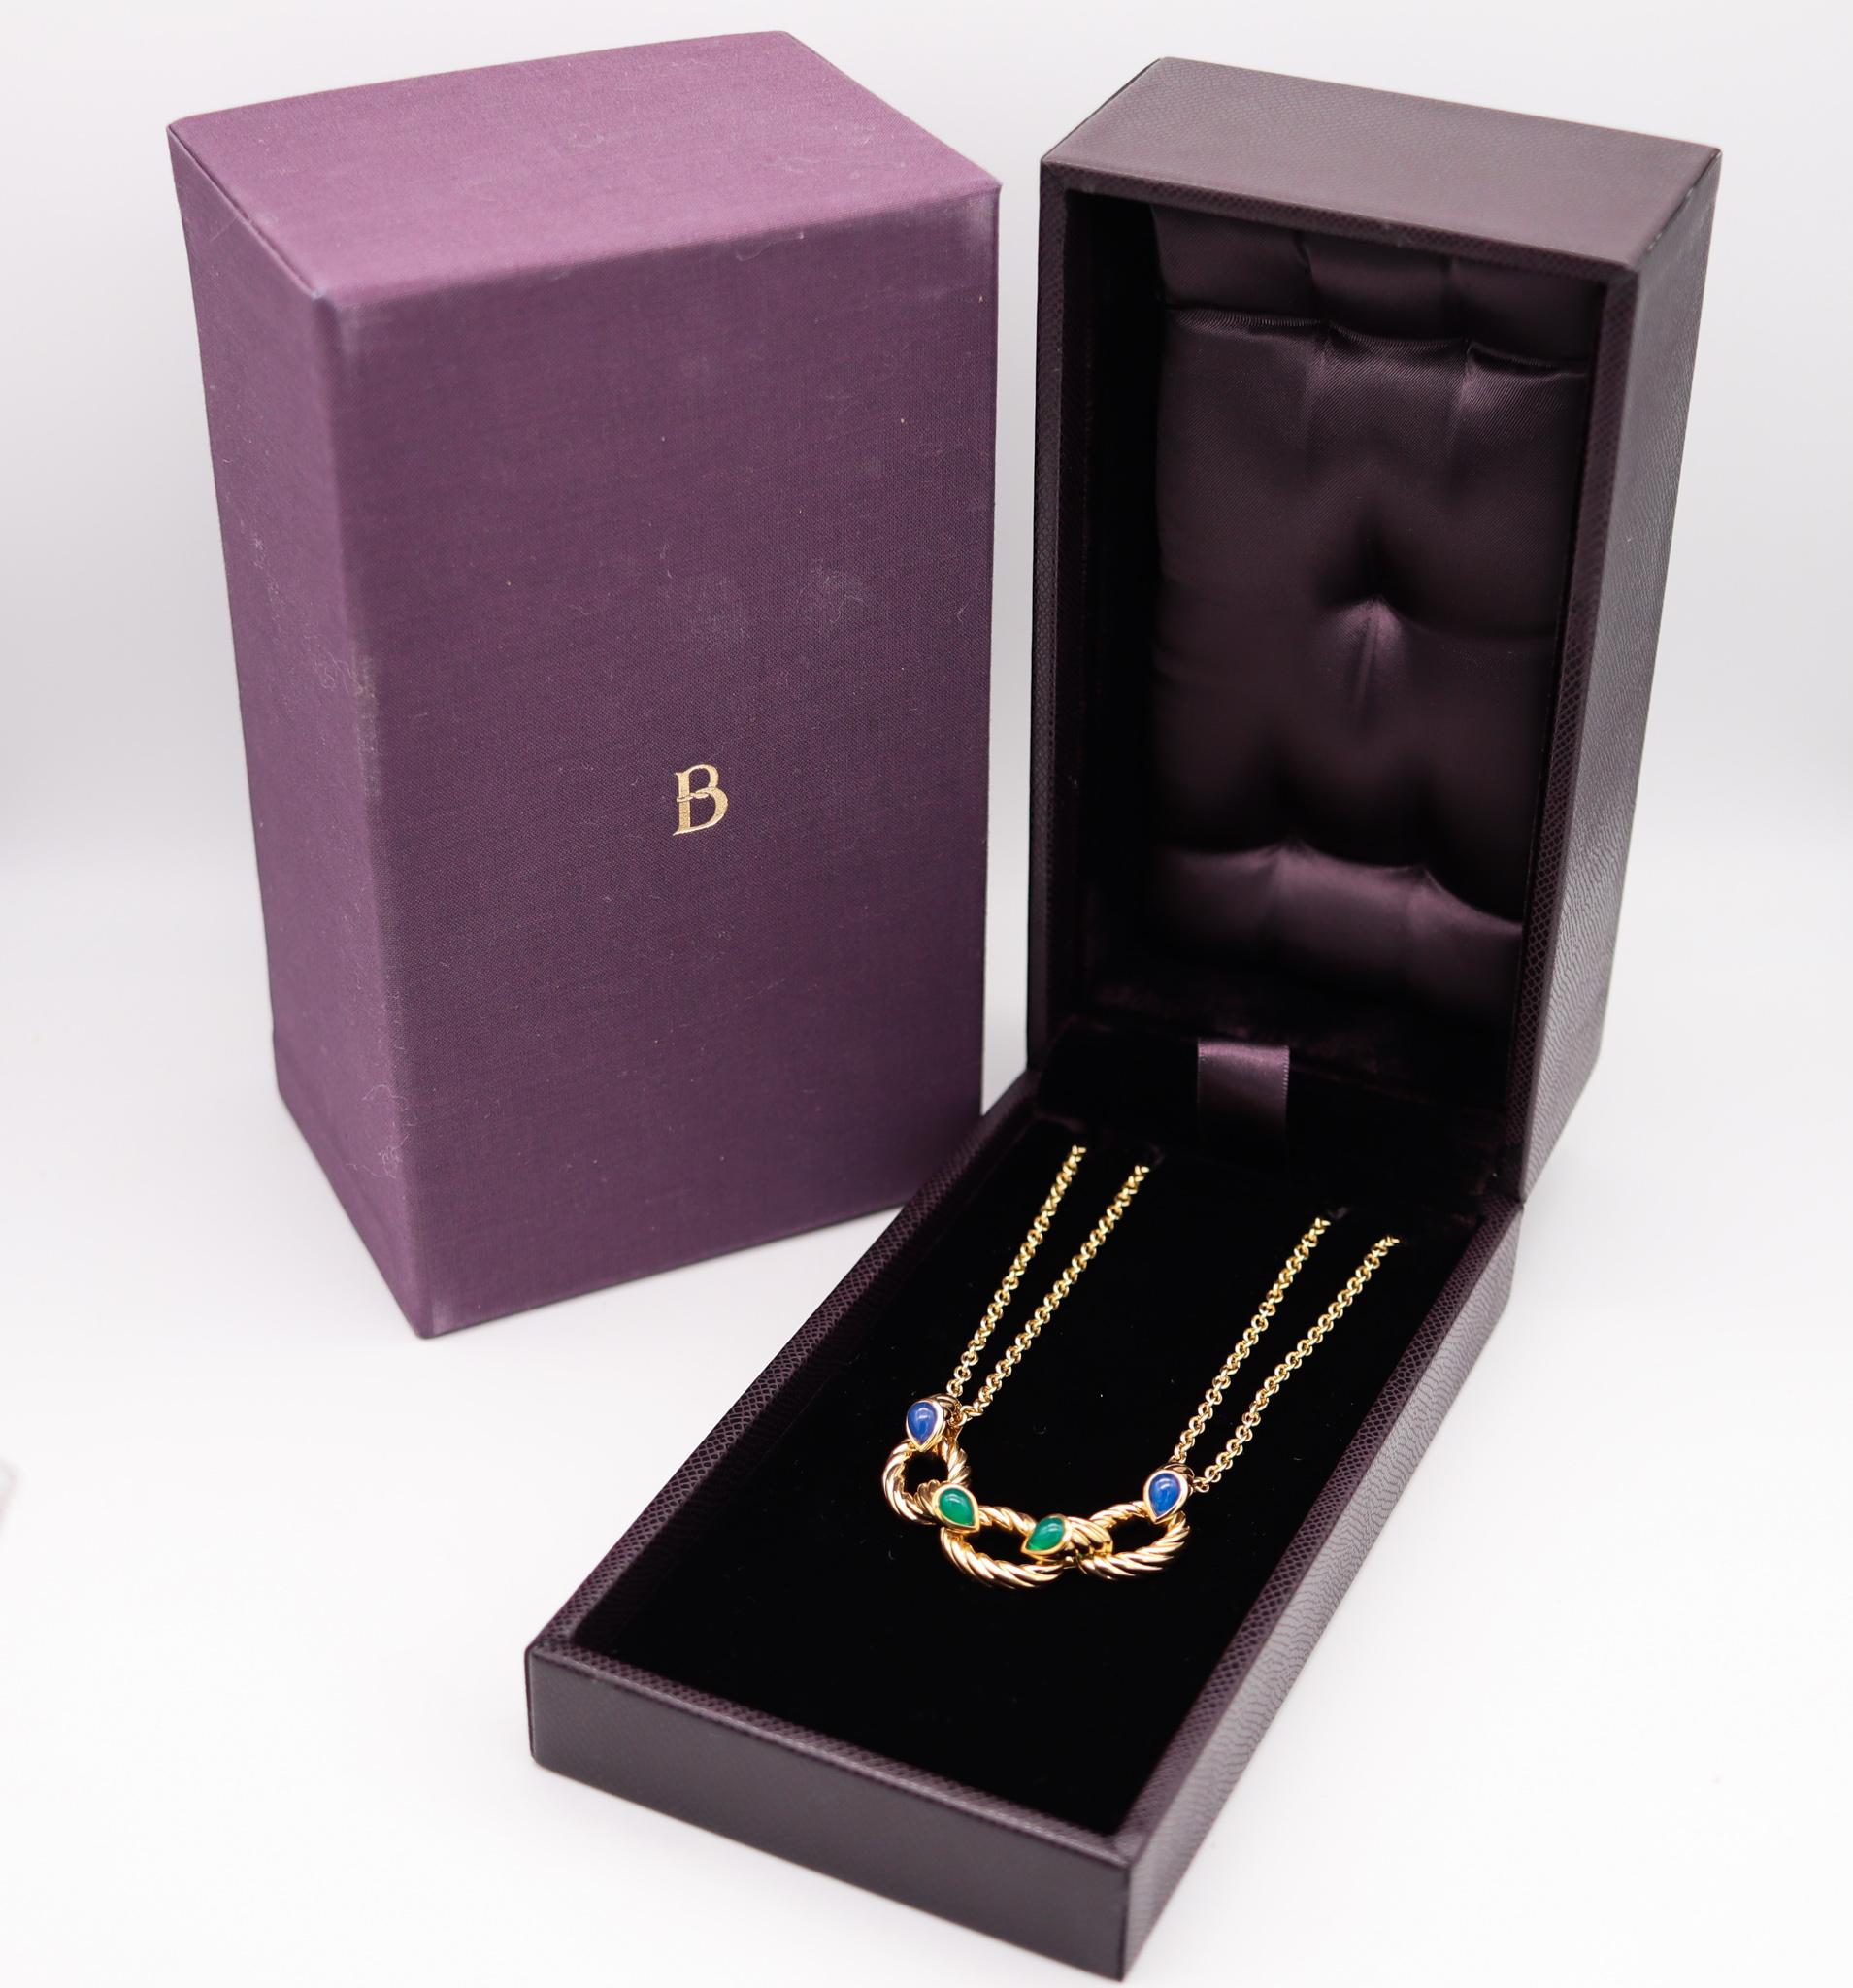 Serpent Boheme gem set necklace designed by Boucheron.

An elegant and casual contemporary piece, created in Paris France by the jewelry house of Boucheron. This iconic Serpent Boheme double chained necklace has been crafted in solid yellow gold of